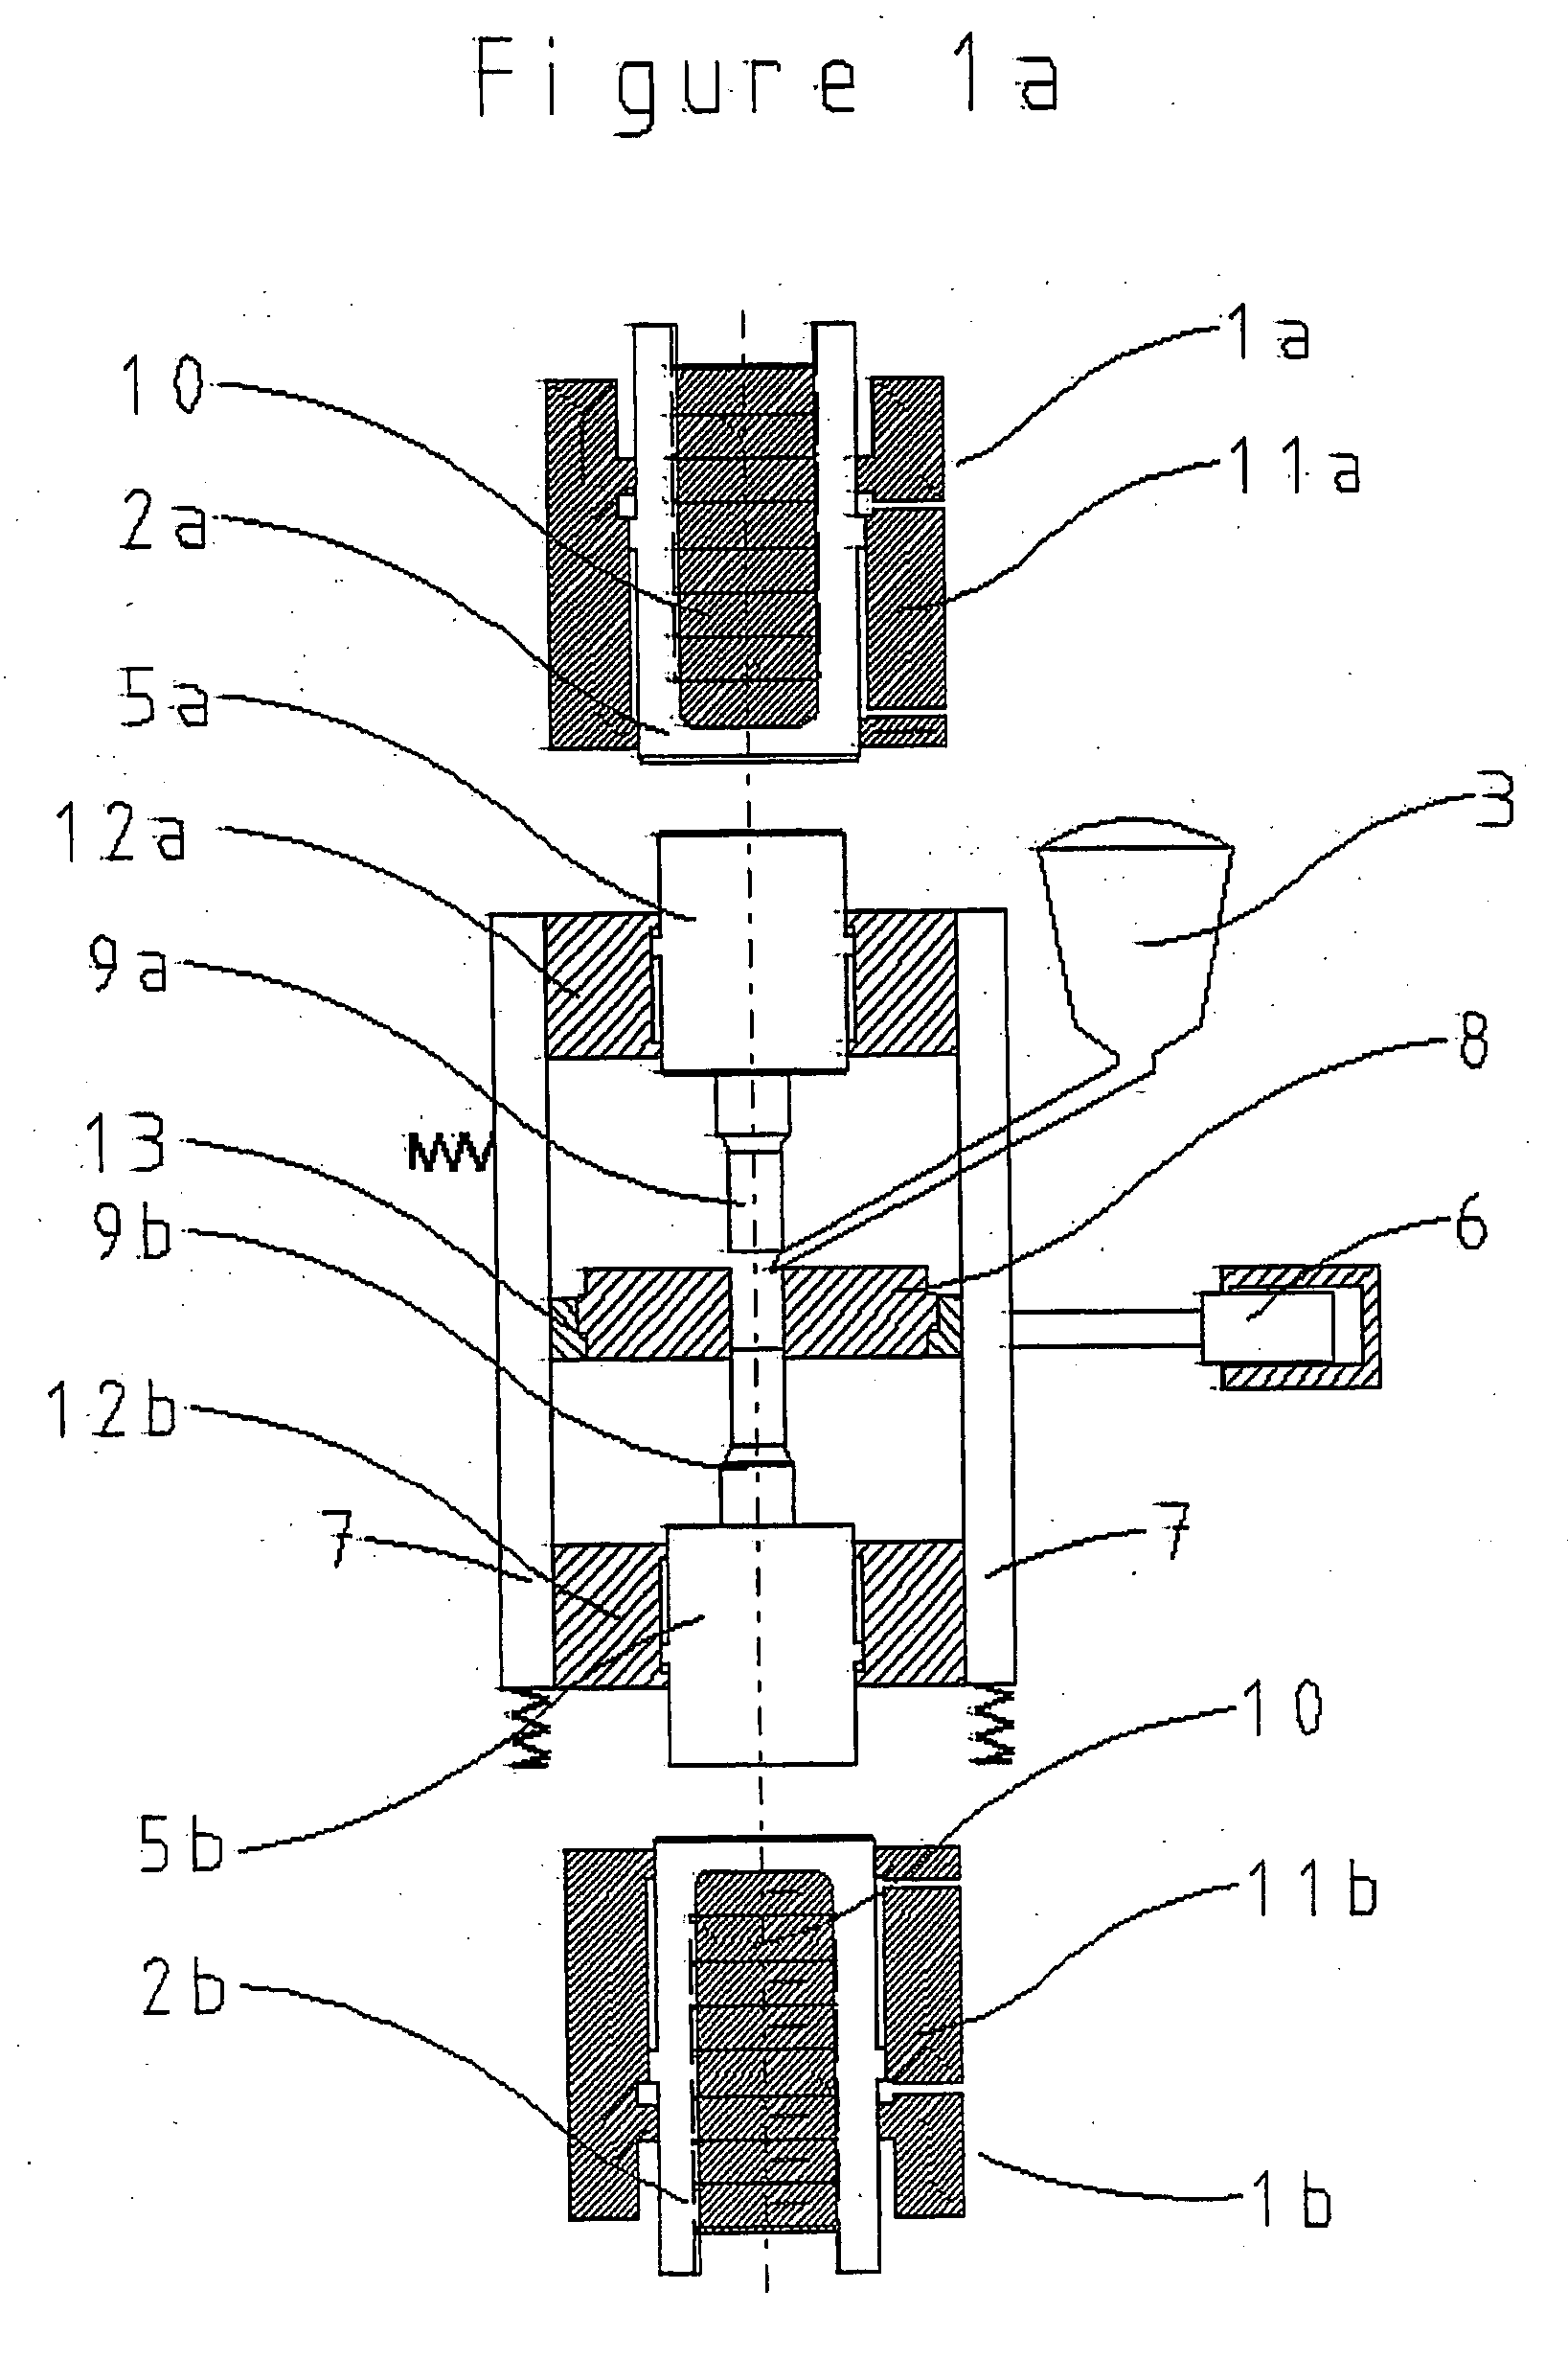 Process for producing a high density by high velocity compacting